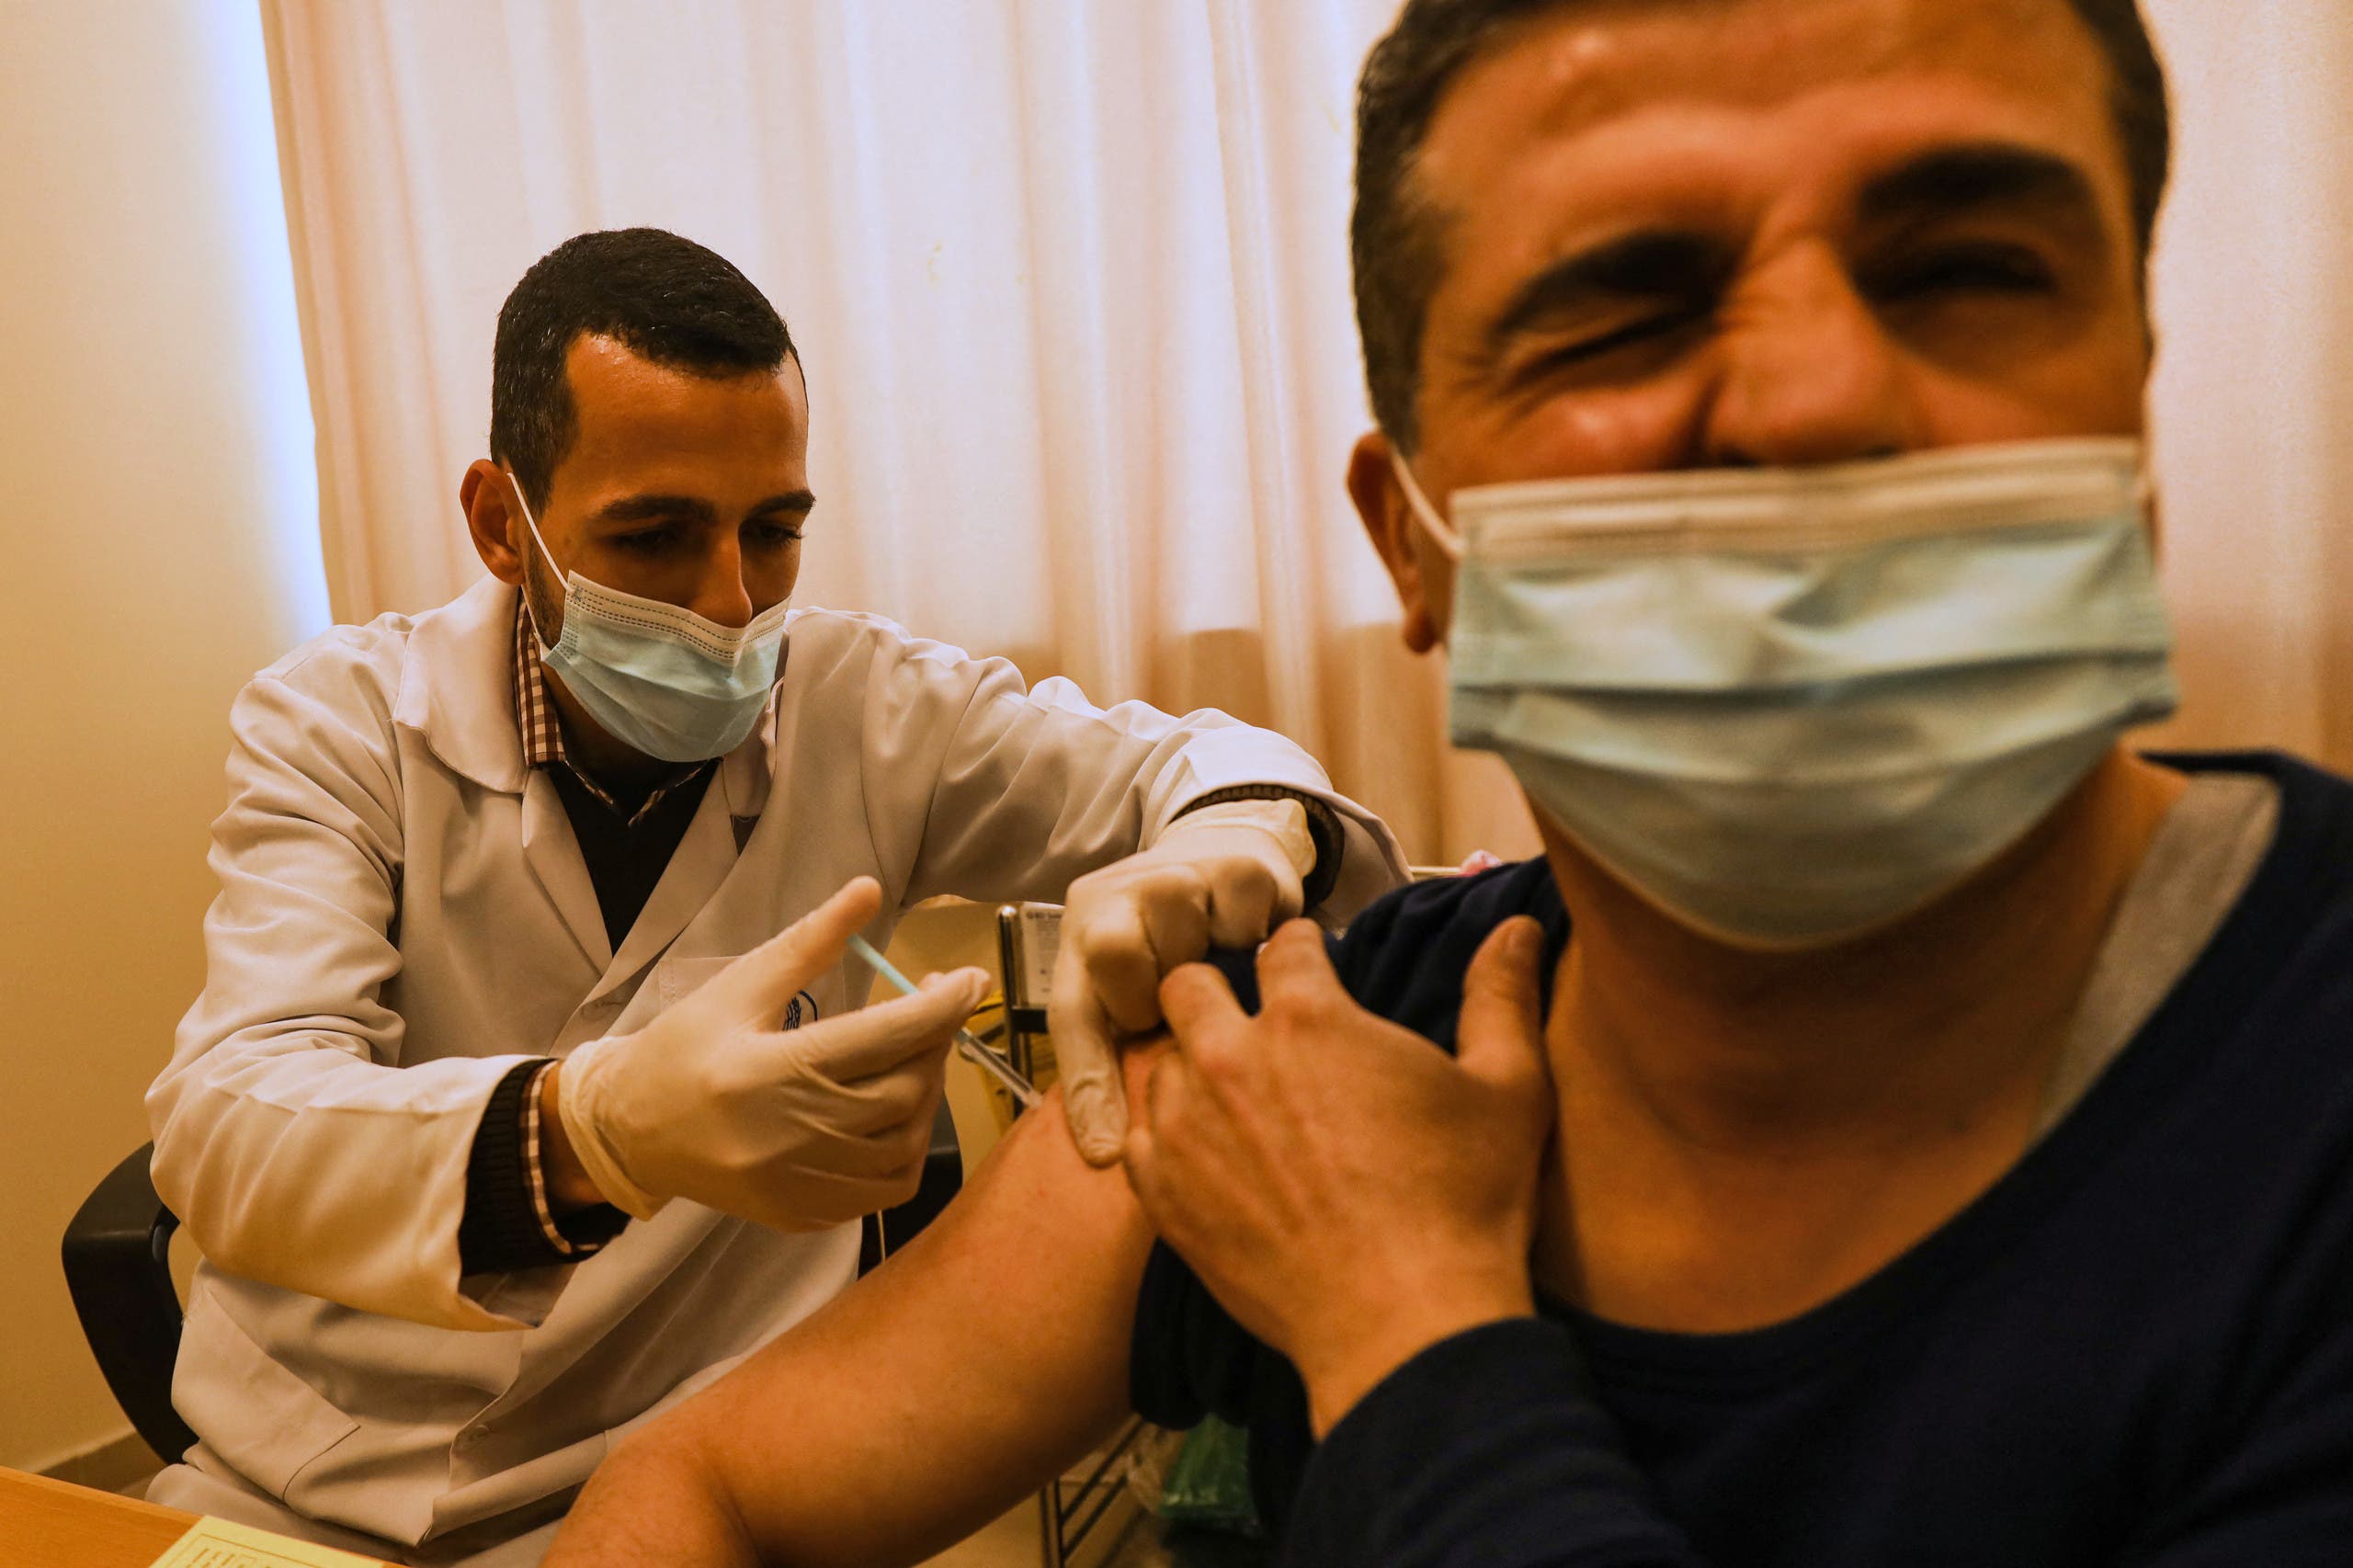 From the vaccination campaign in Gaza